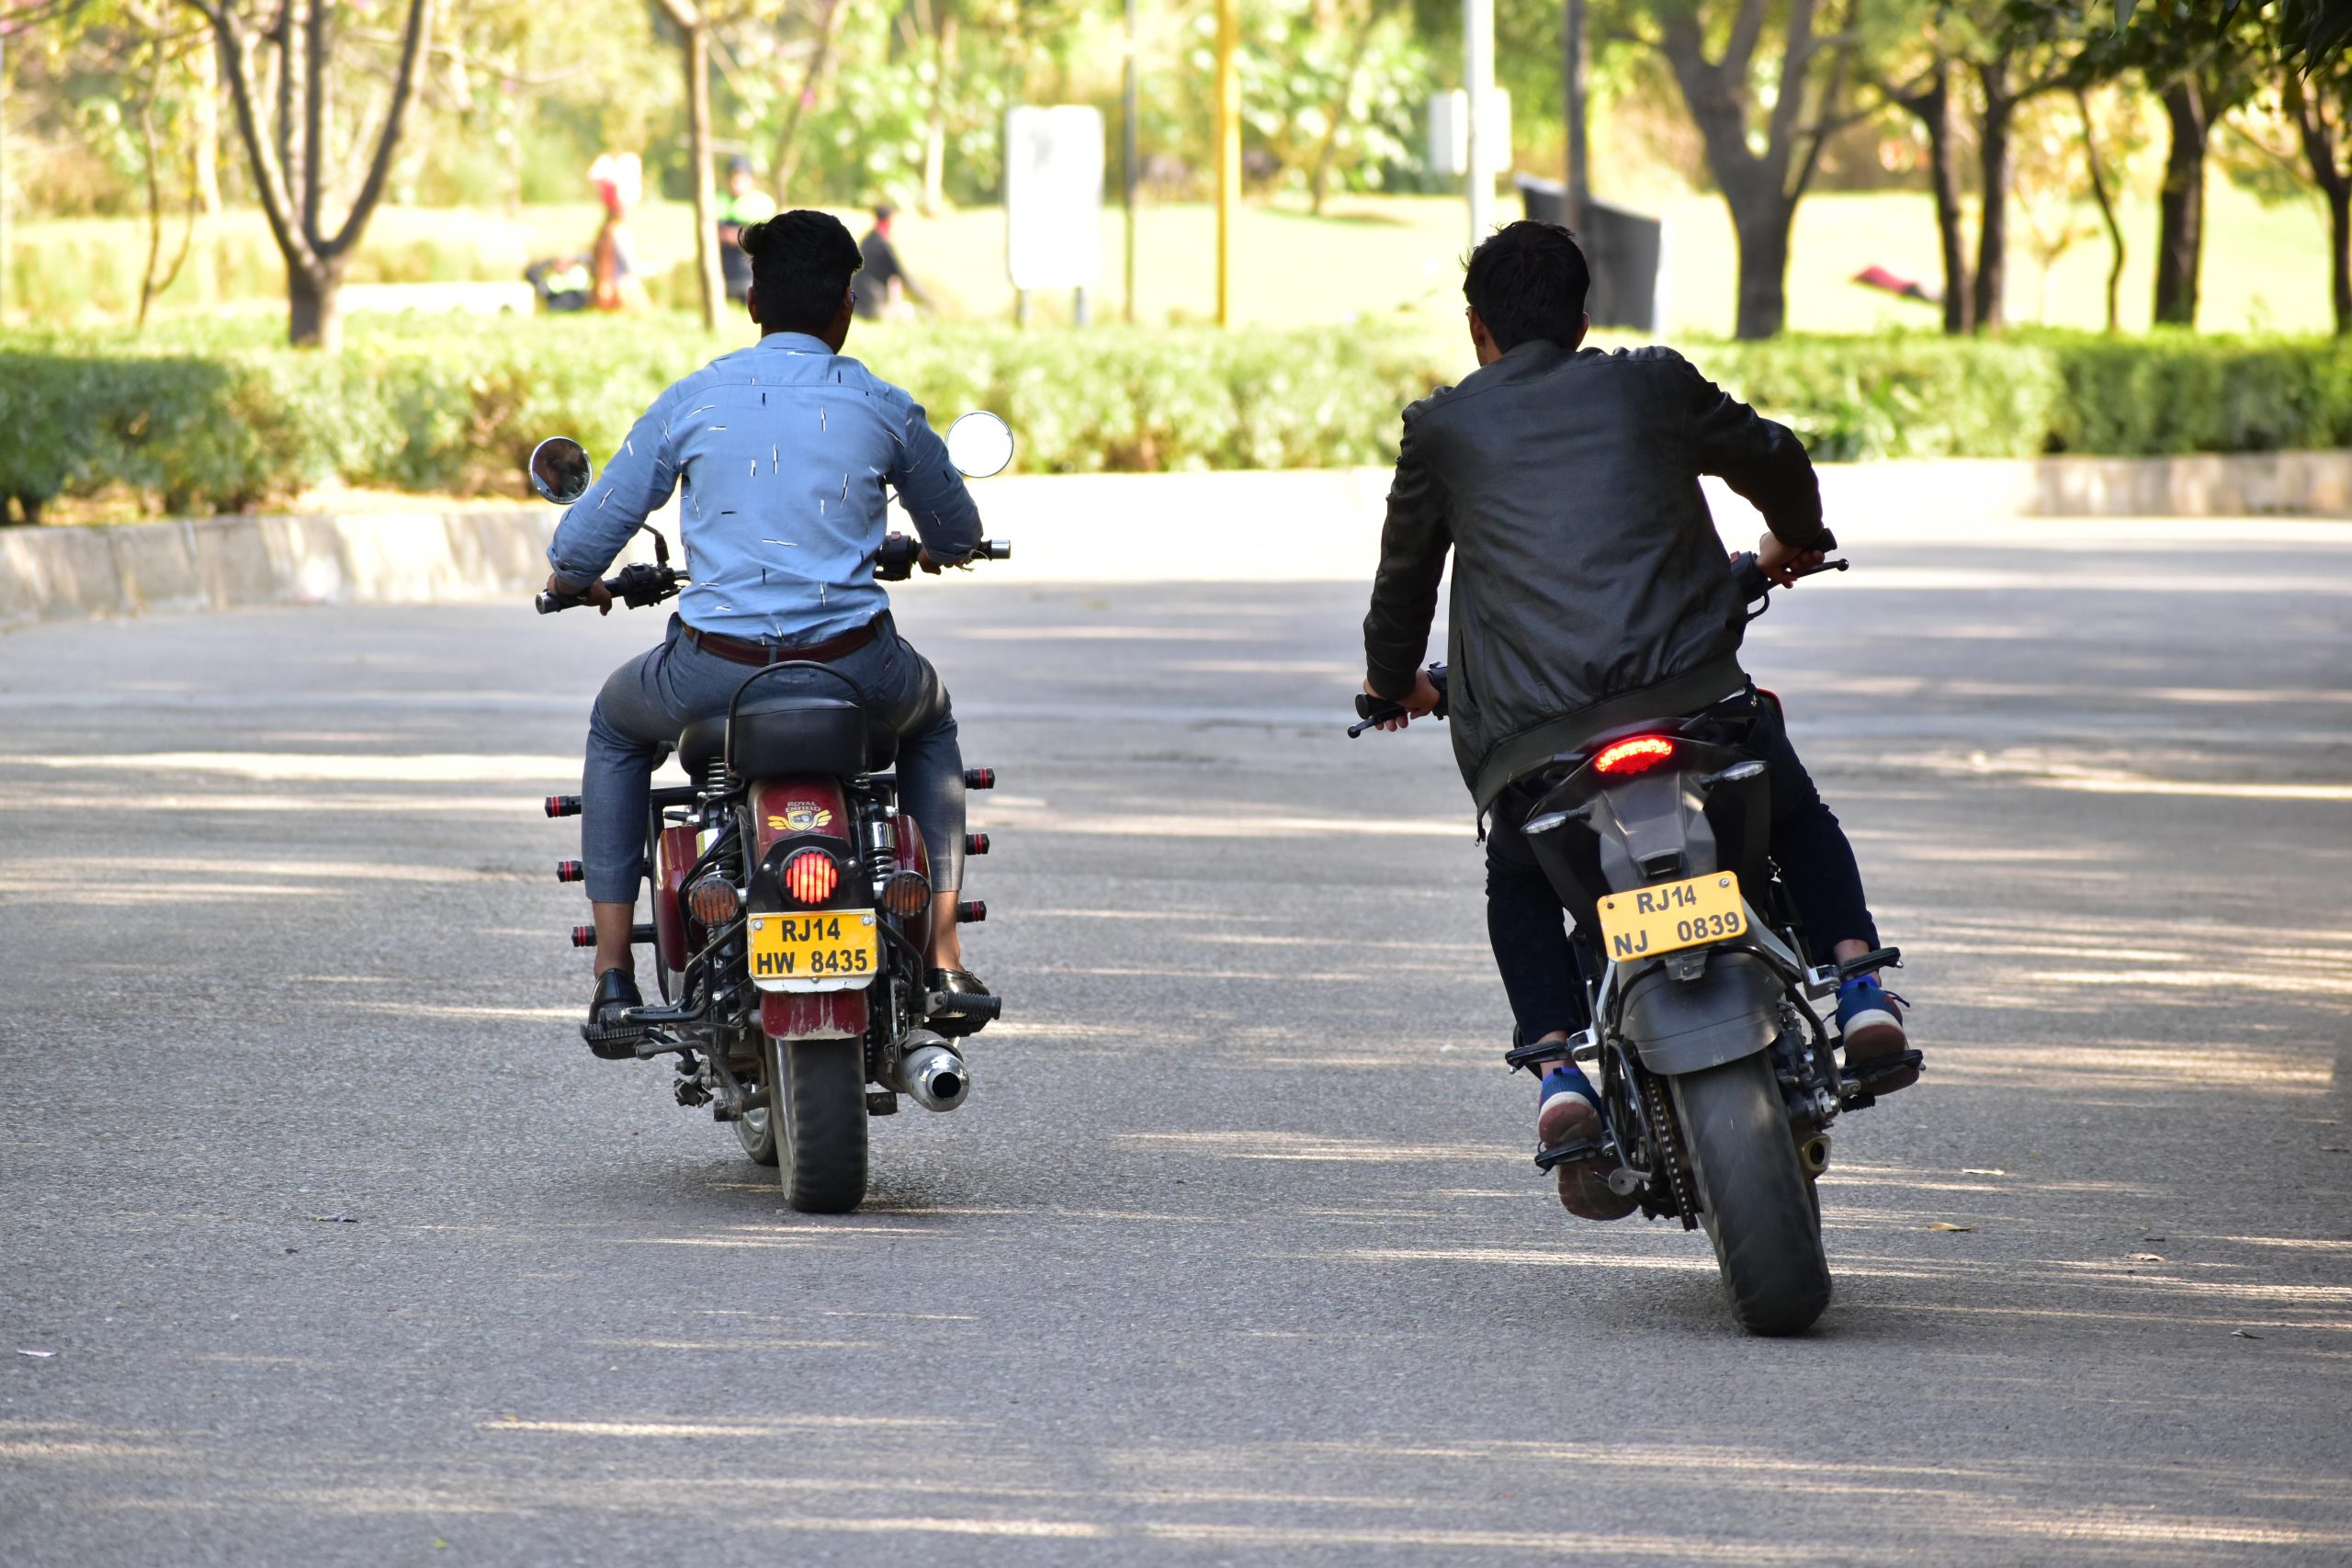 Boys driving bikes on a road